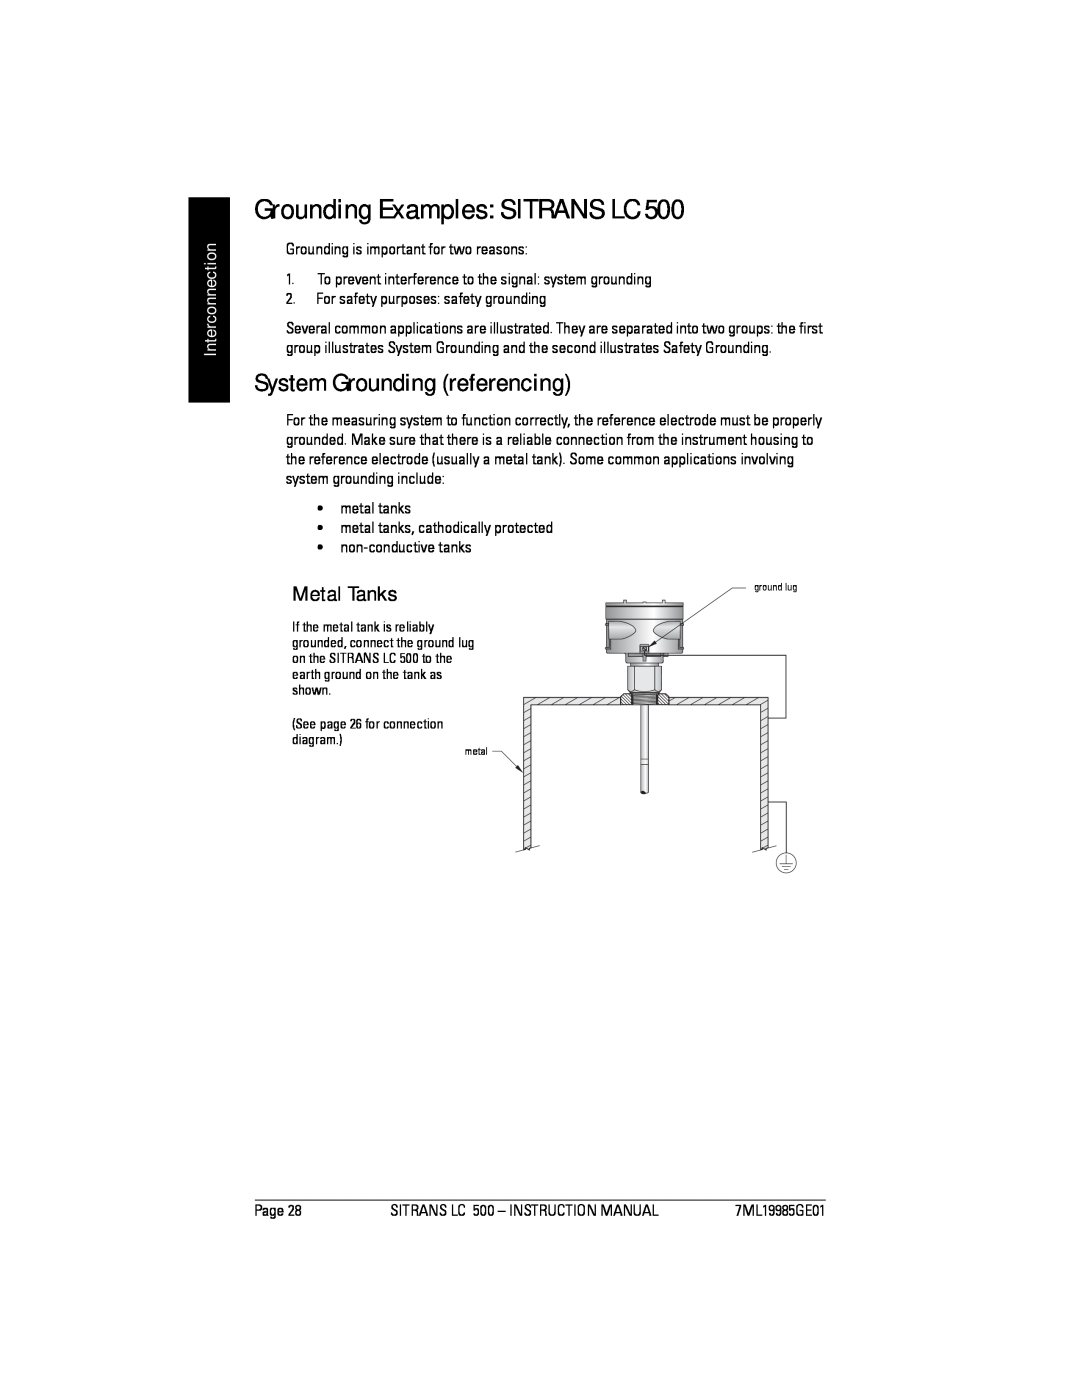 Siemens LC 500, Sitrans Grounding Examples SITRANS LC, System Grounding referencing, Metal Tanks, Interconnection 